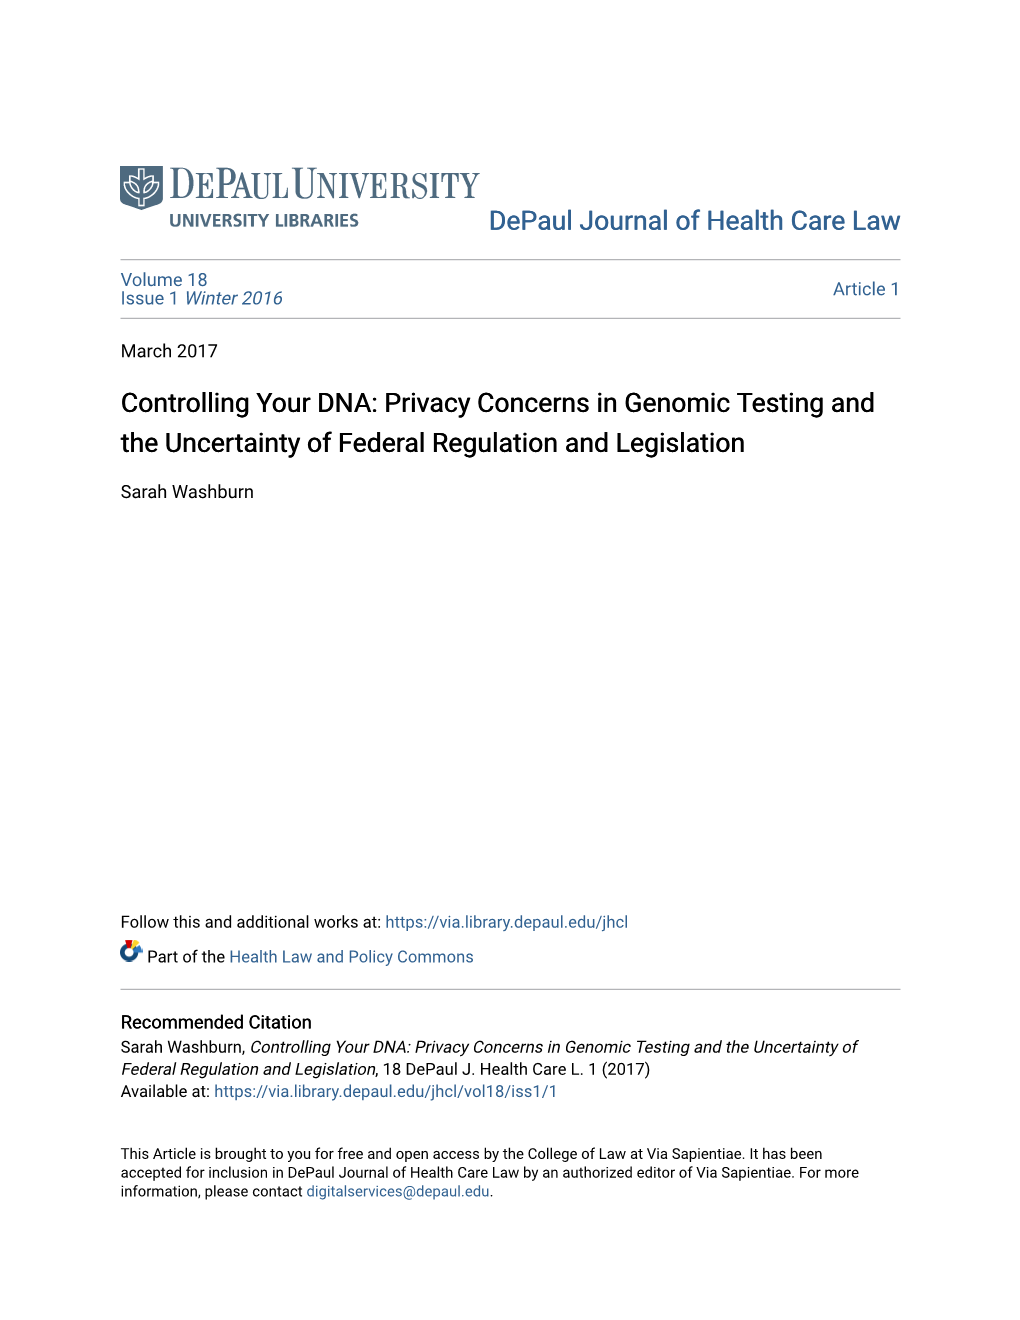 Controlling Your DNA: Privacy Concerns in Genomic Testing and the Uncertainty of Federal Regulation and Legislation